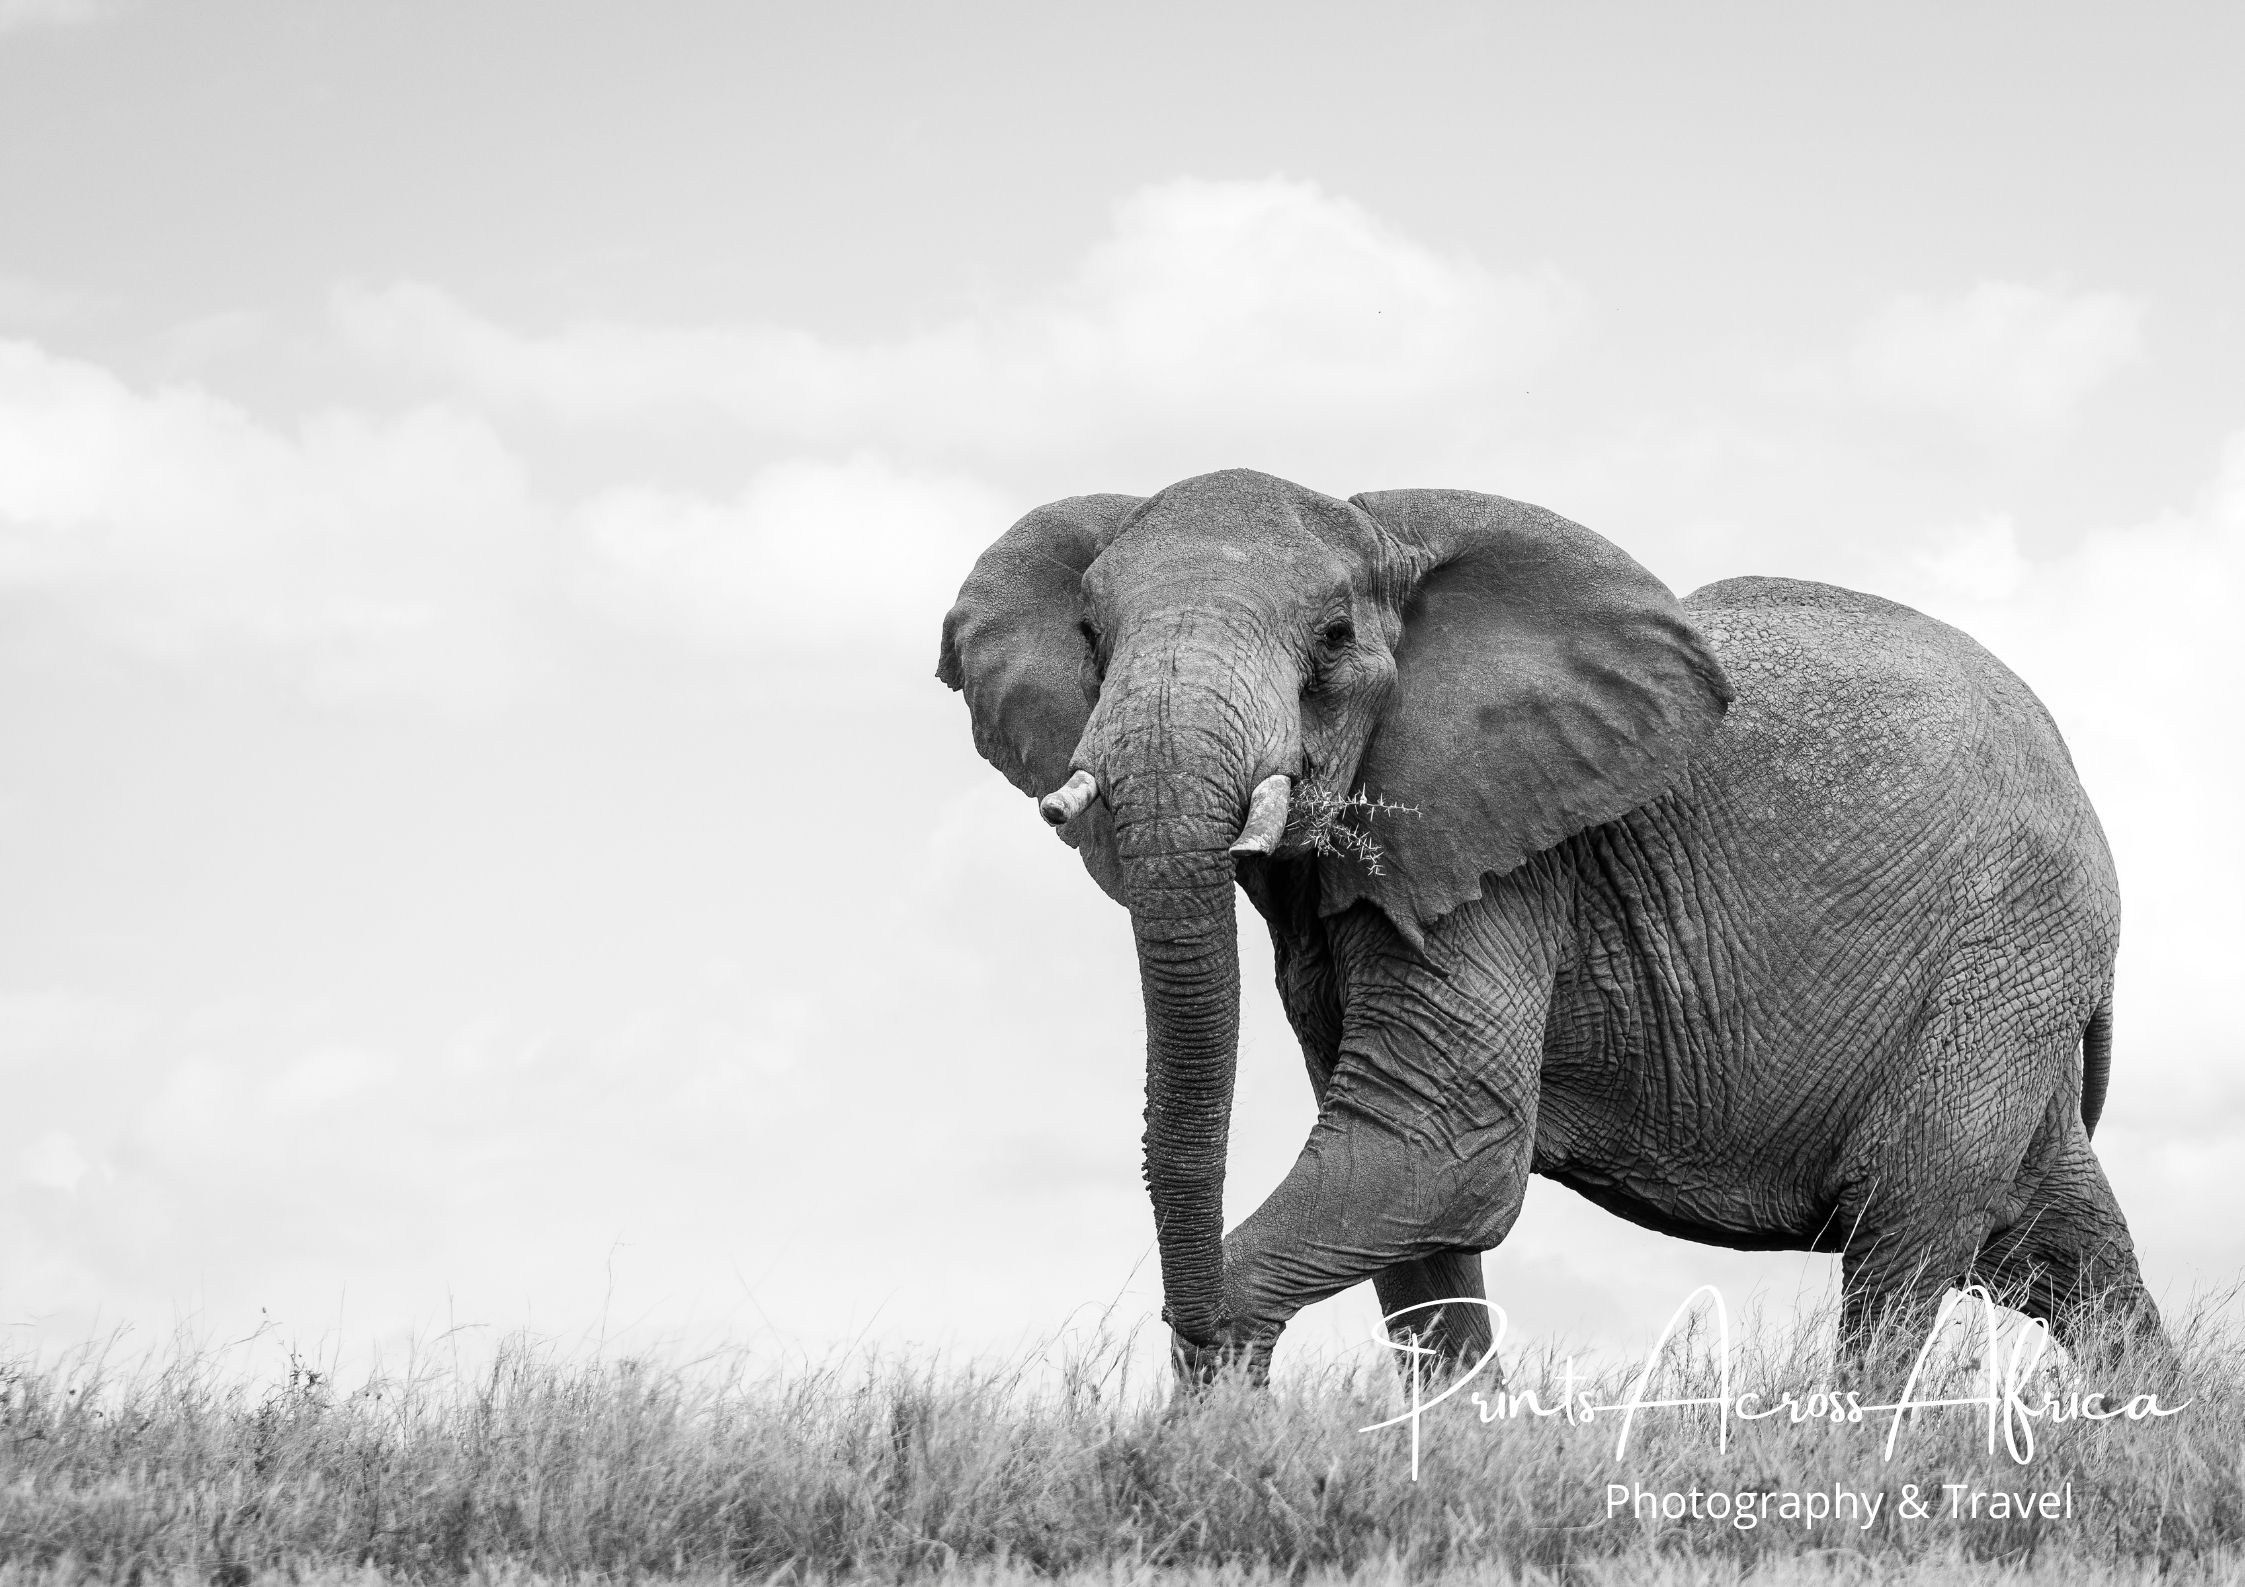 A large elephant in black and white